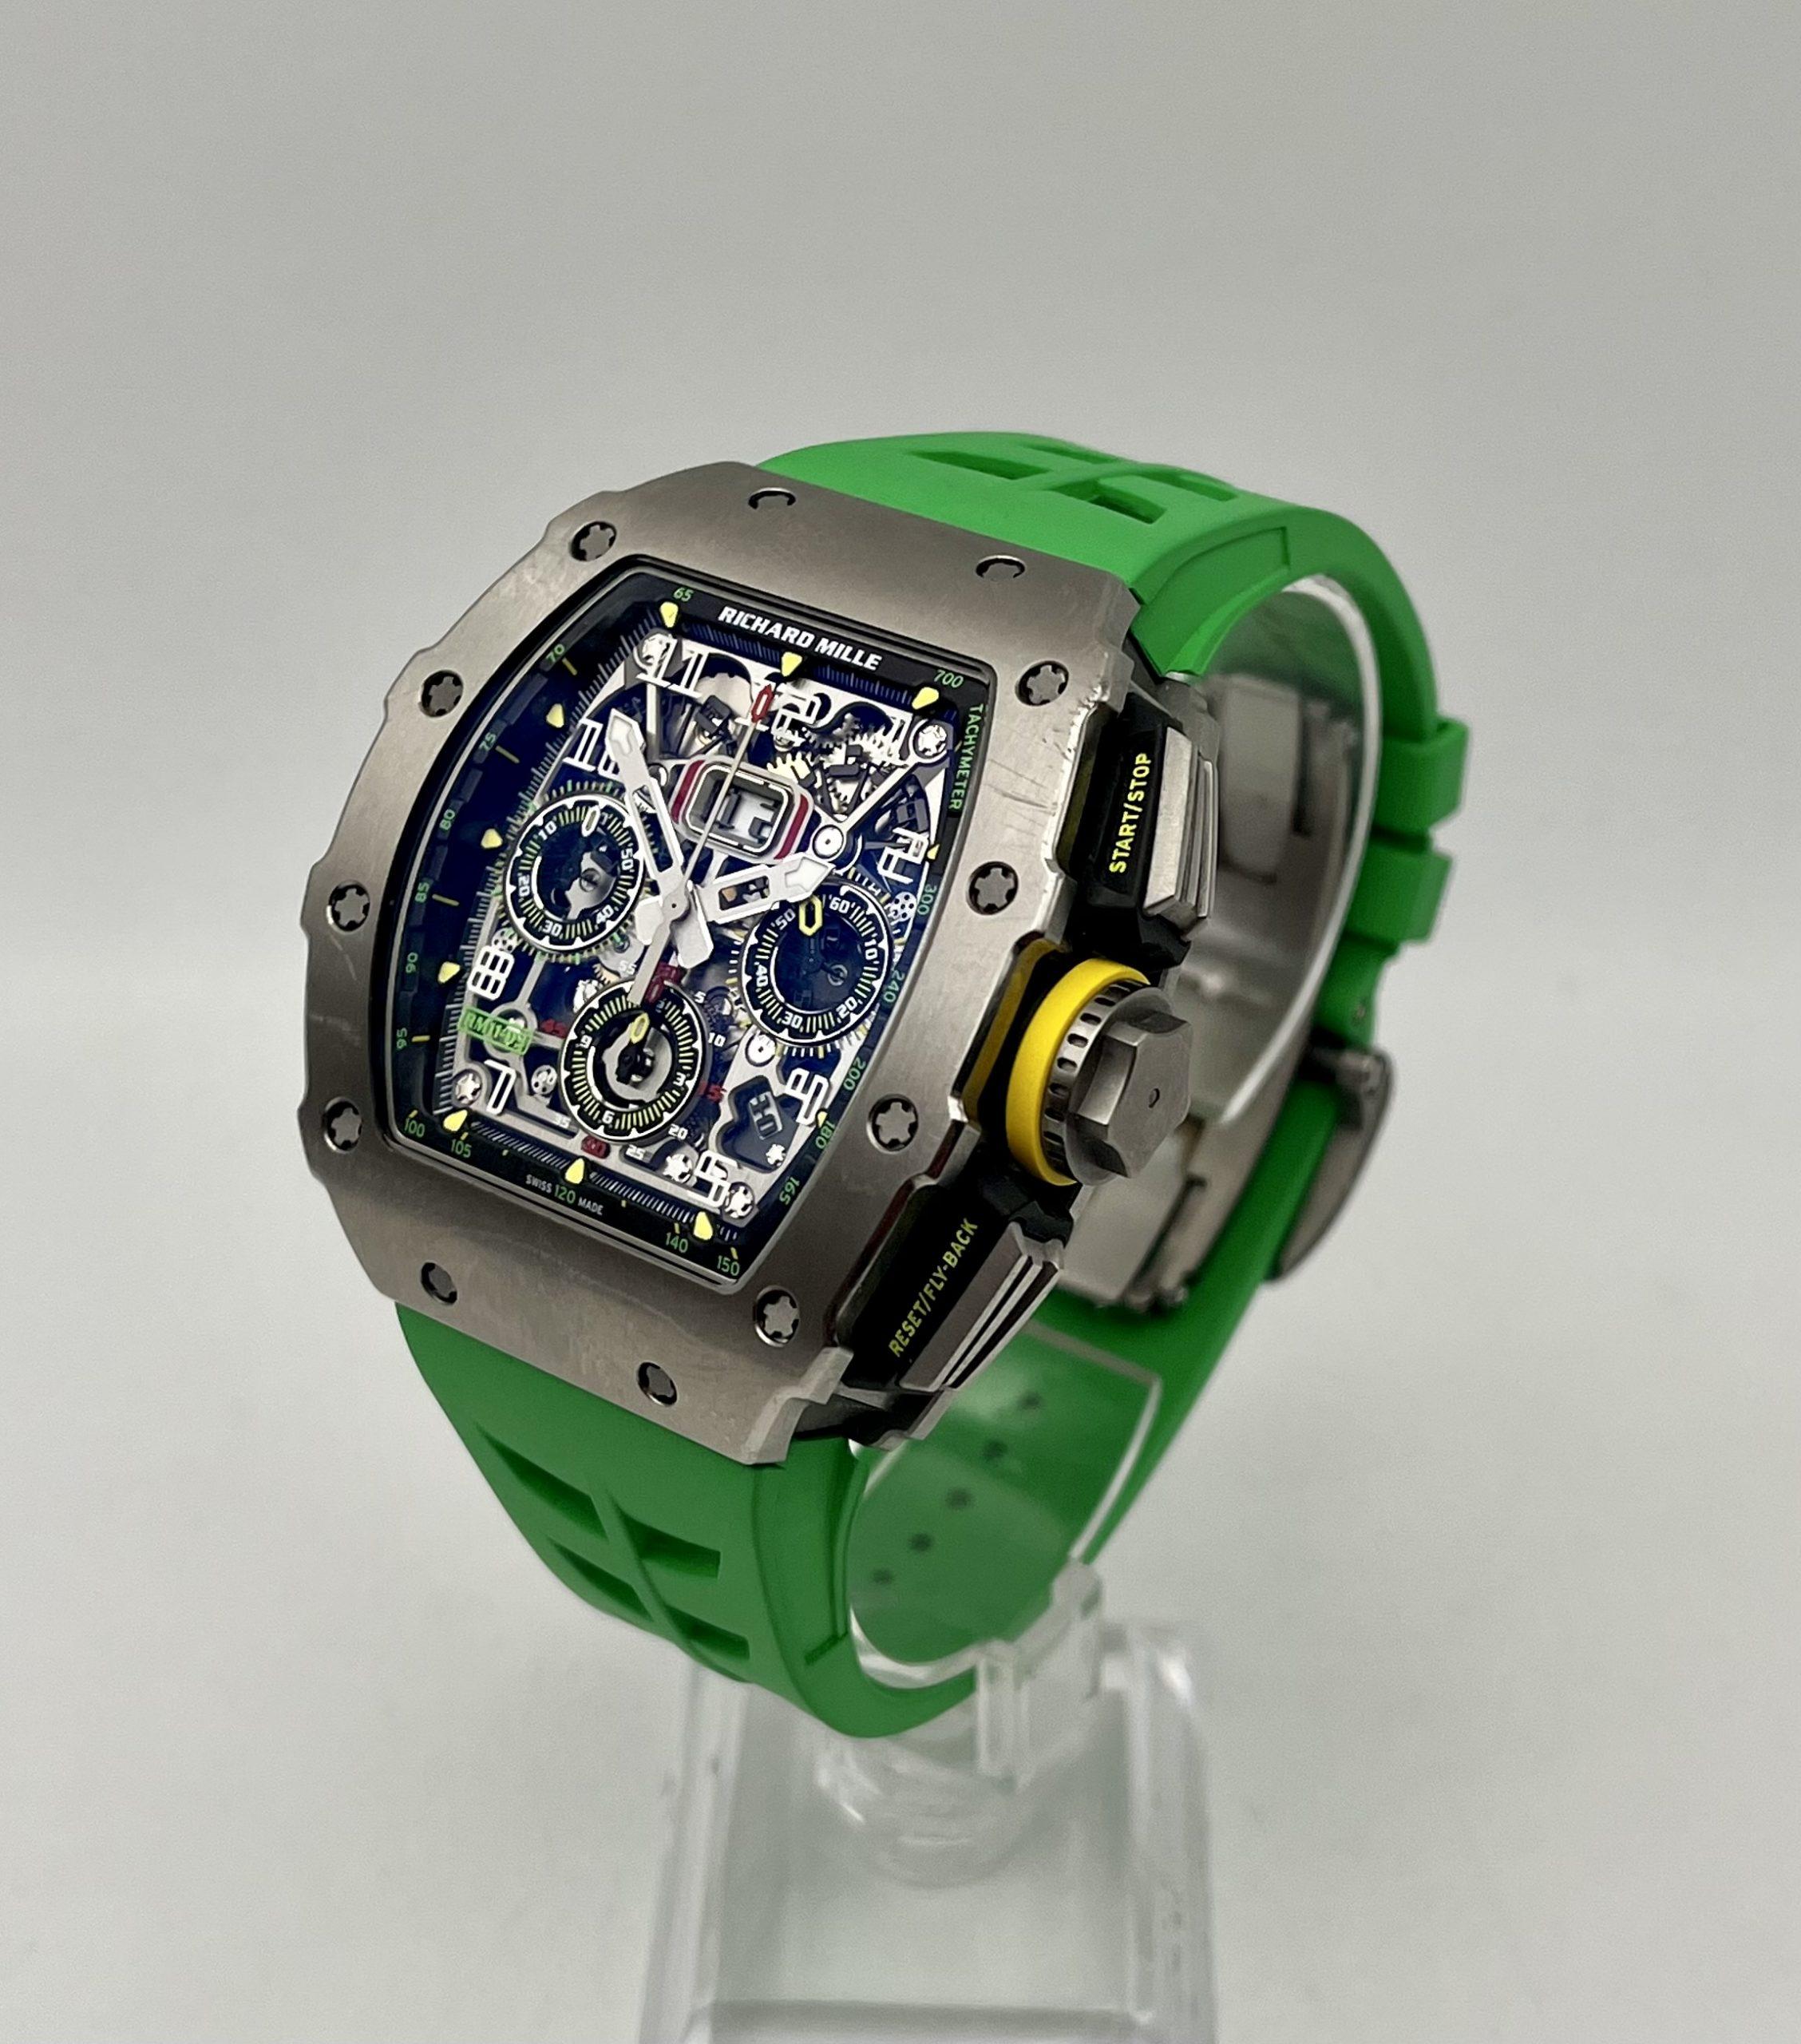 RM11_03 Richard Mille 
Excellent condition with box and papers
CALIBRE RMAC3
Skeletonised automatic movement with hours, minutes, seconds, flyback chronograph, 60-minute countdown timer at 9 o’clock, 12-hour totaliser, oversize date, month indicator